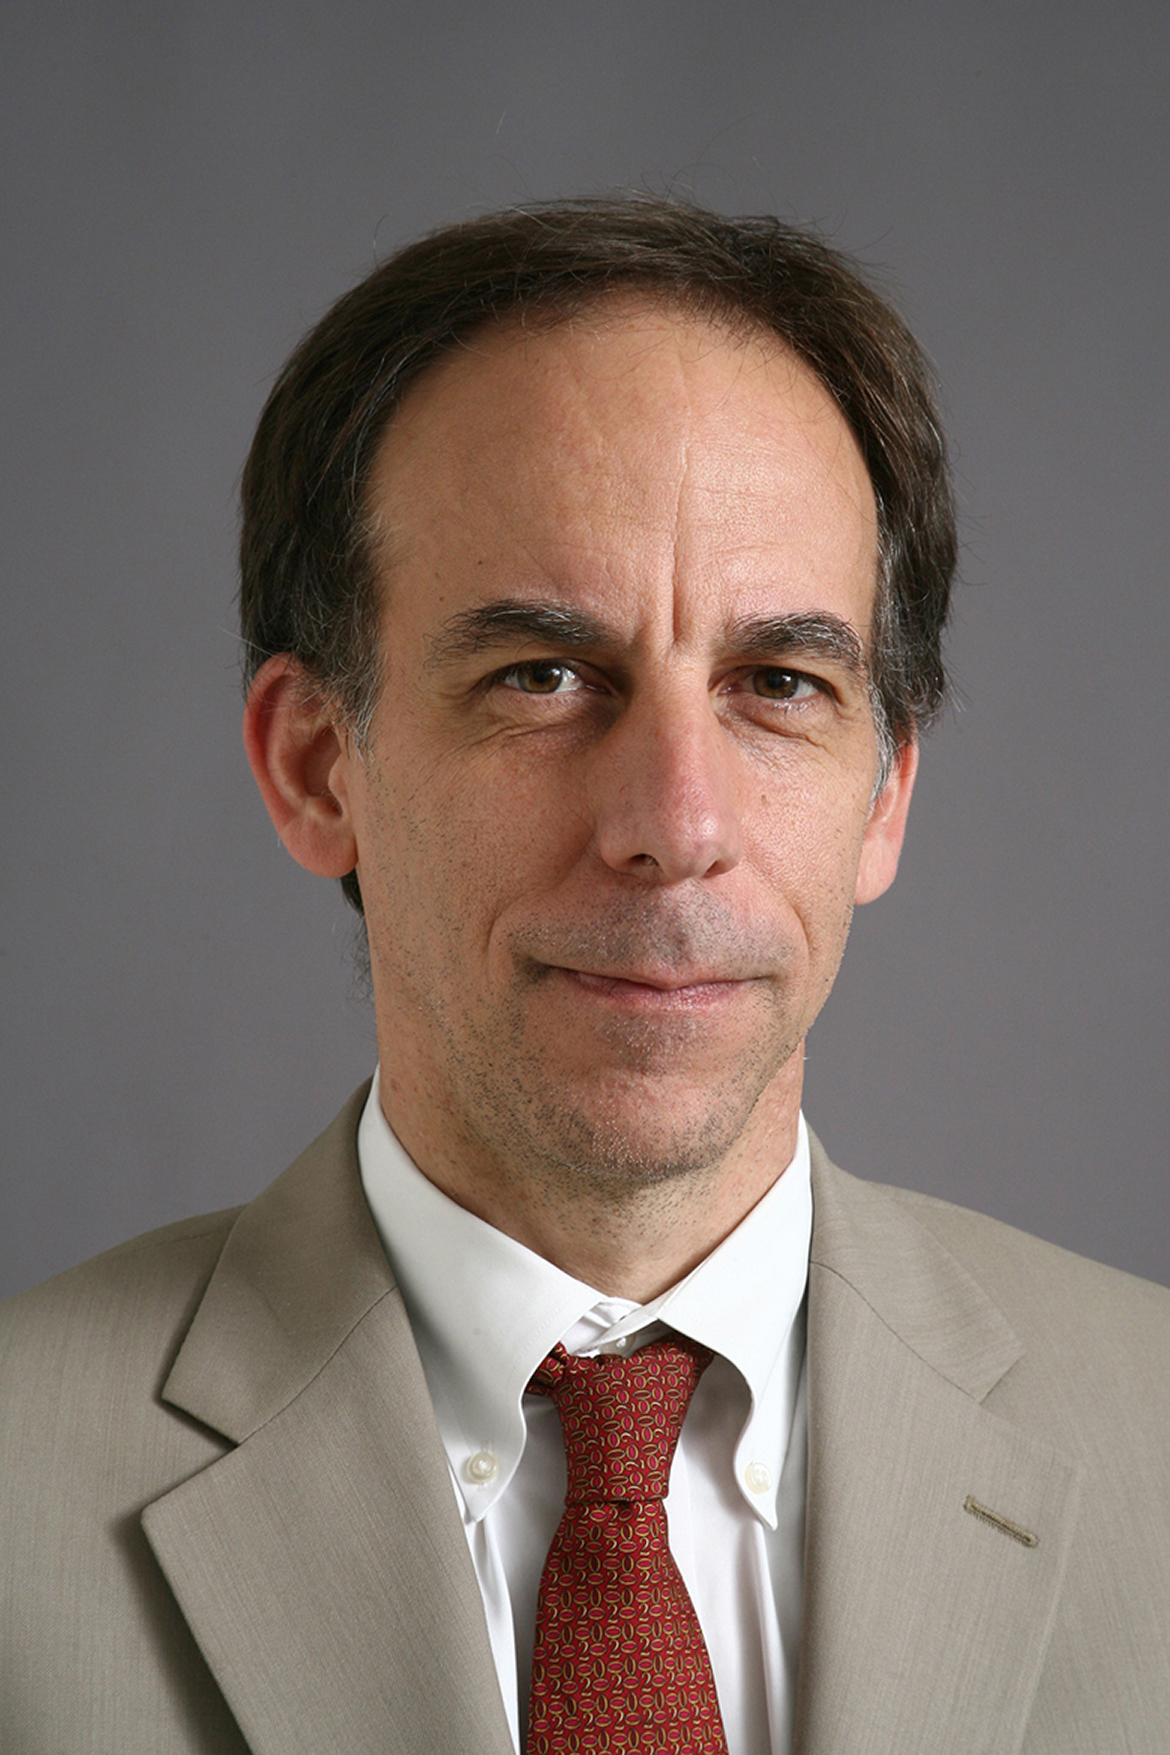 Ben Pryor, Dean of the College of Innovative Learning (2011 – 2012)